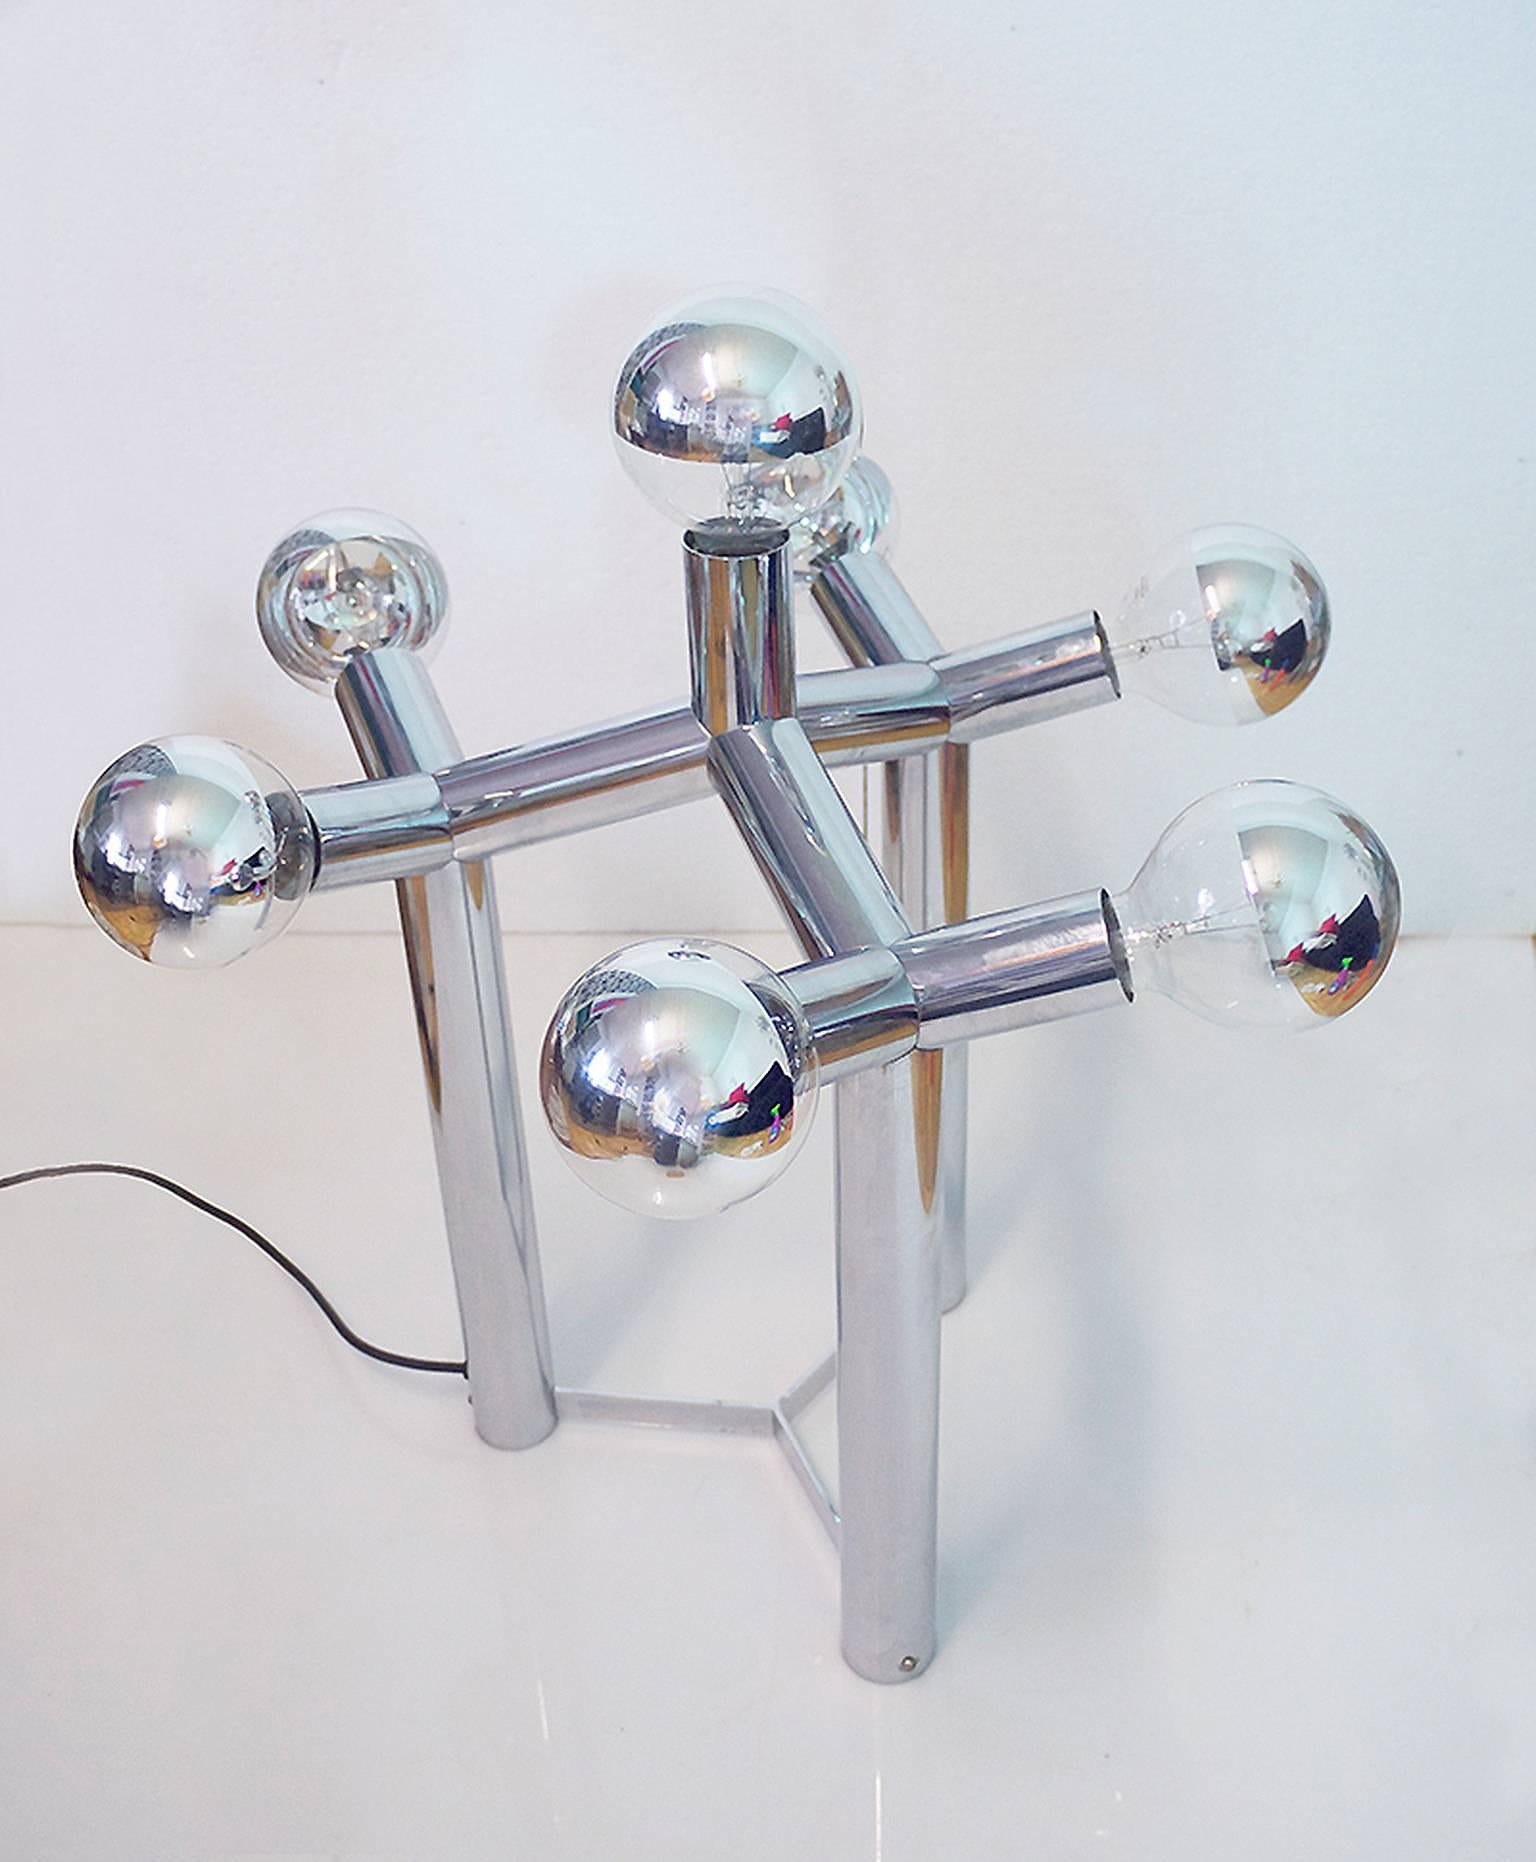 Atomic structured table or floor lamp made by Robert Haussmann, Swiss lamp international in the 1960s with seven large Edison sockets. Delivery without bulbs.
  